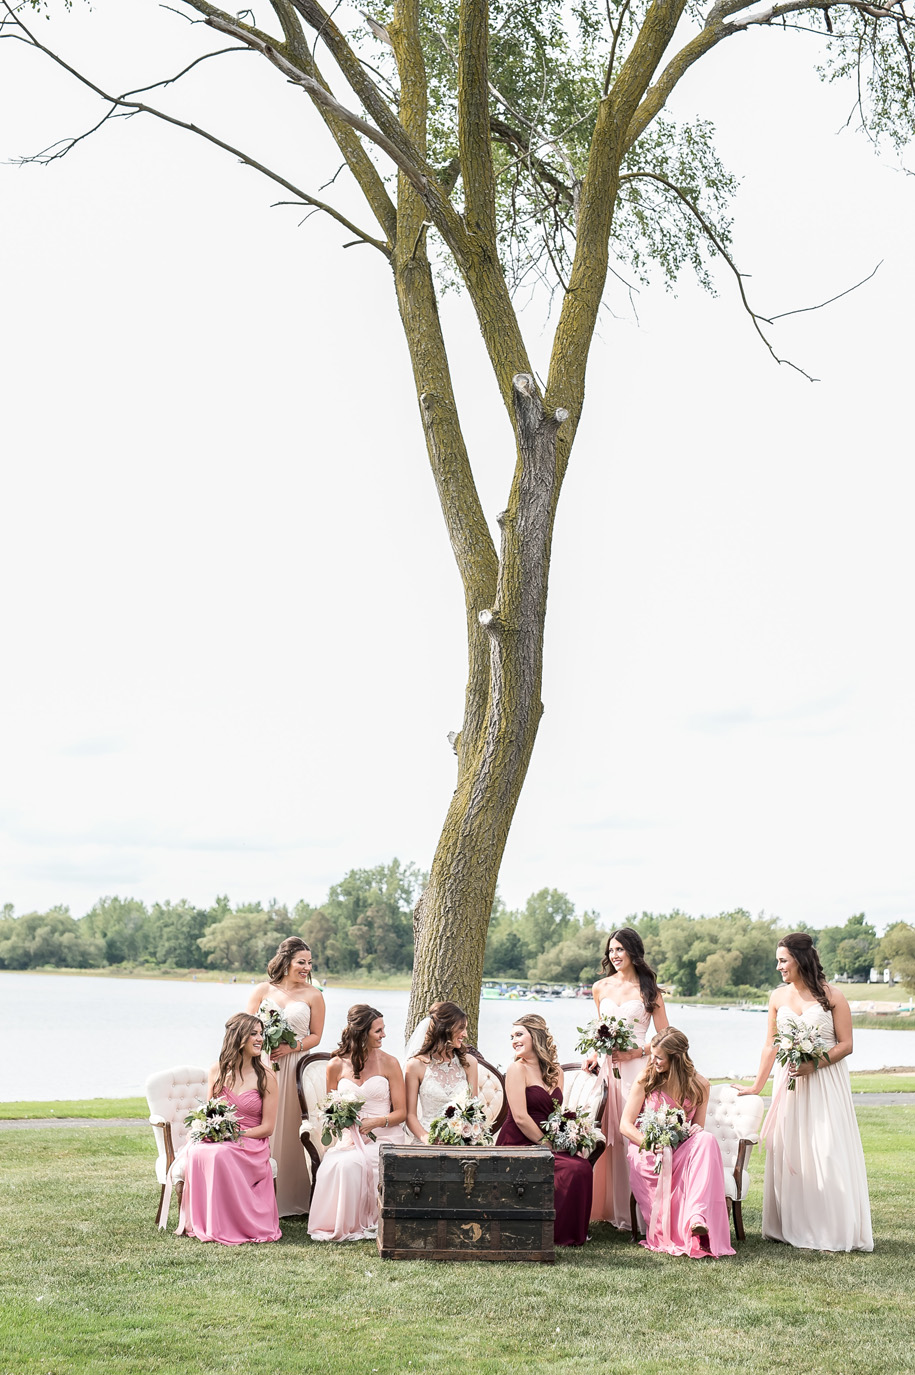 Vintage style wedding l Bridesmaids in pinks and wines l Rustic bridal bouquet with cascading ribbon l Shabby Chic Waldenwoods Wedding on the Water